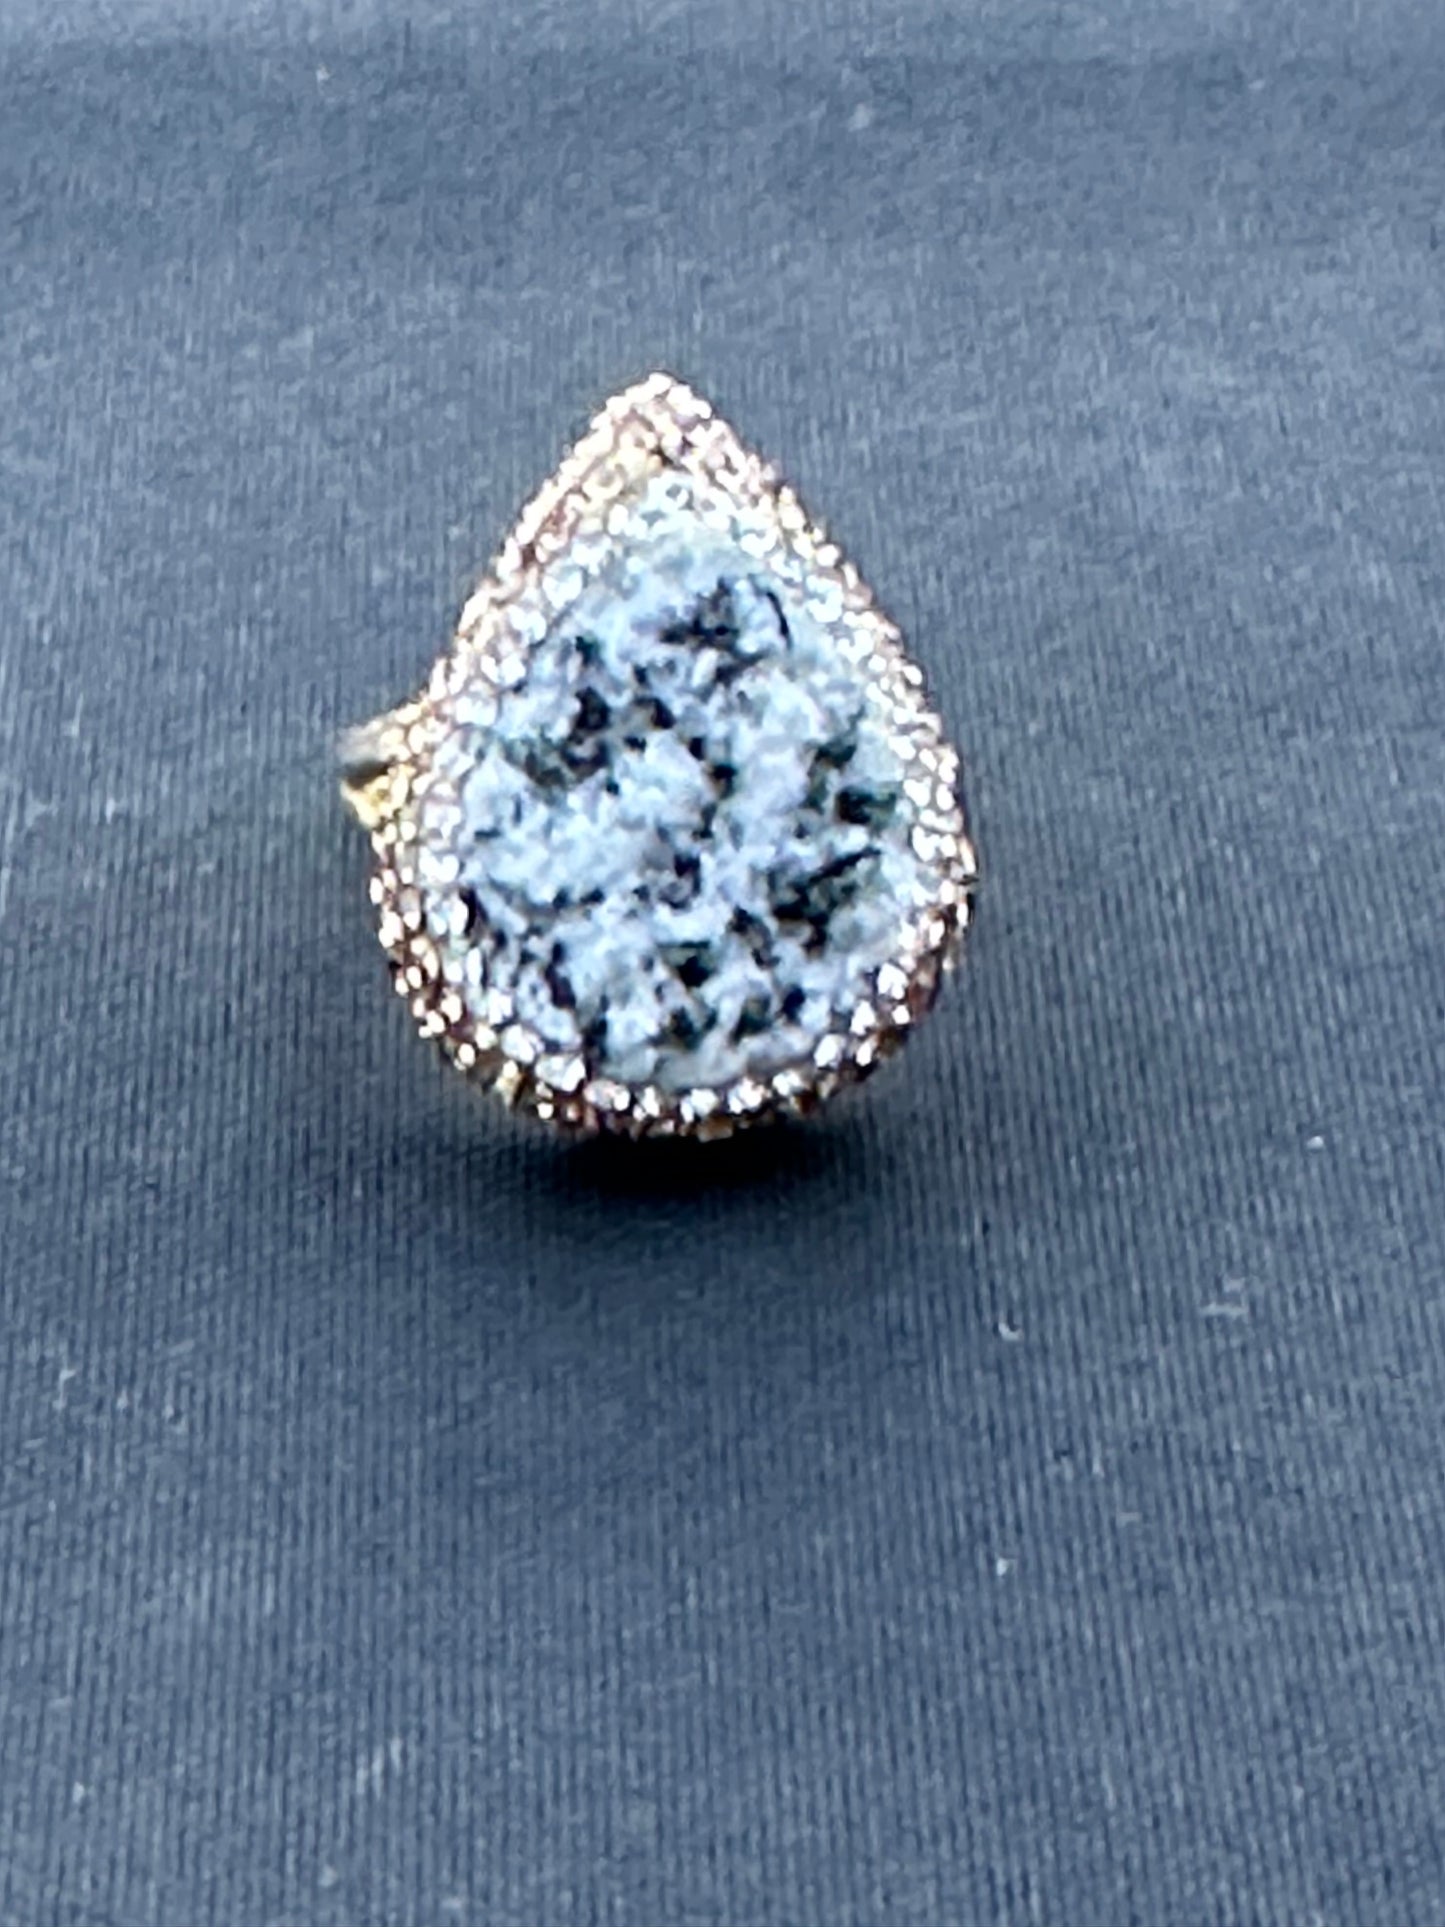 Dendritic Agate Cubic Zirconia, Marcasite, Sterling Silver Adjustable Ring